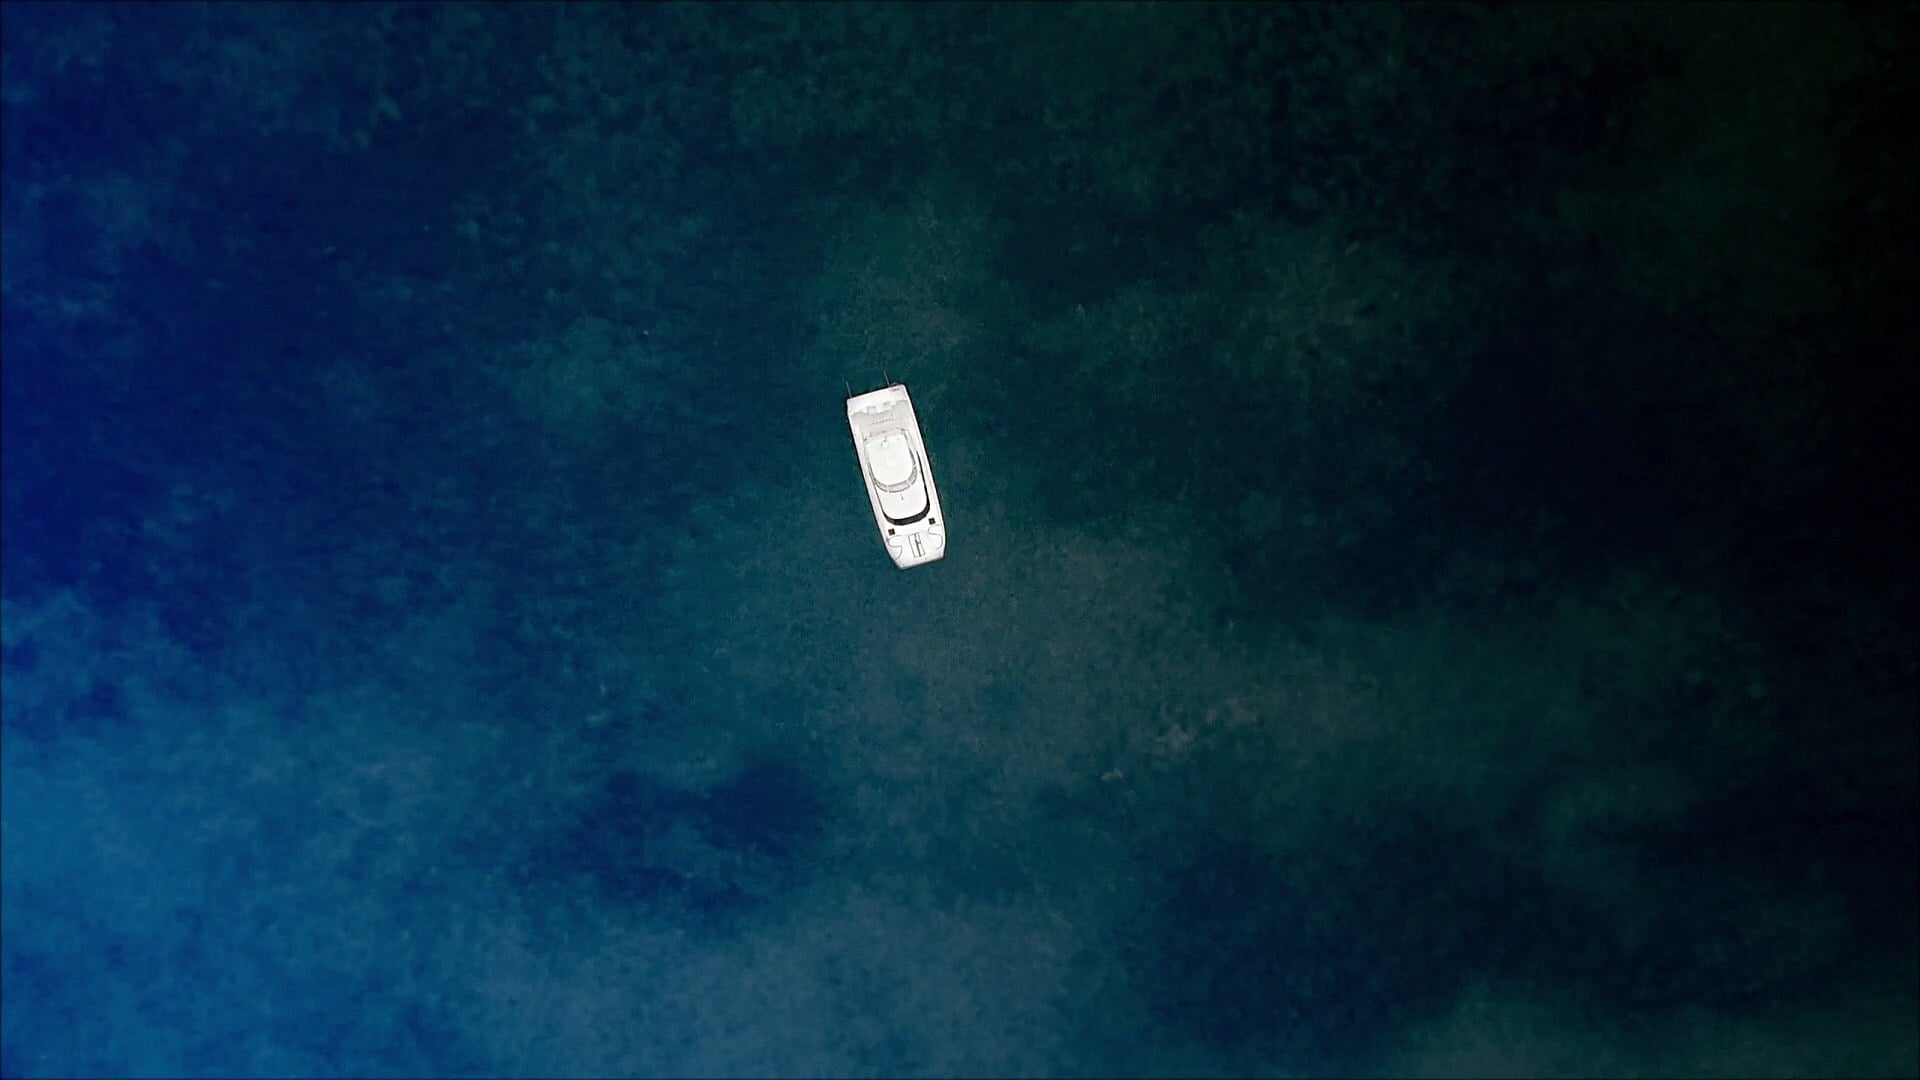 A screenshot from the film Harpoon. A white boat is stranded in the vast ocean with nothing around. 